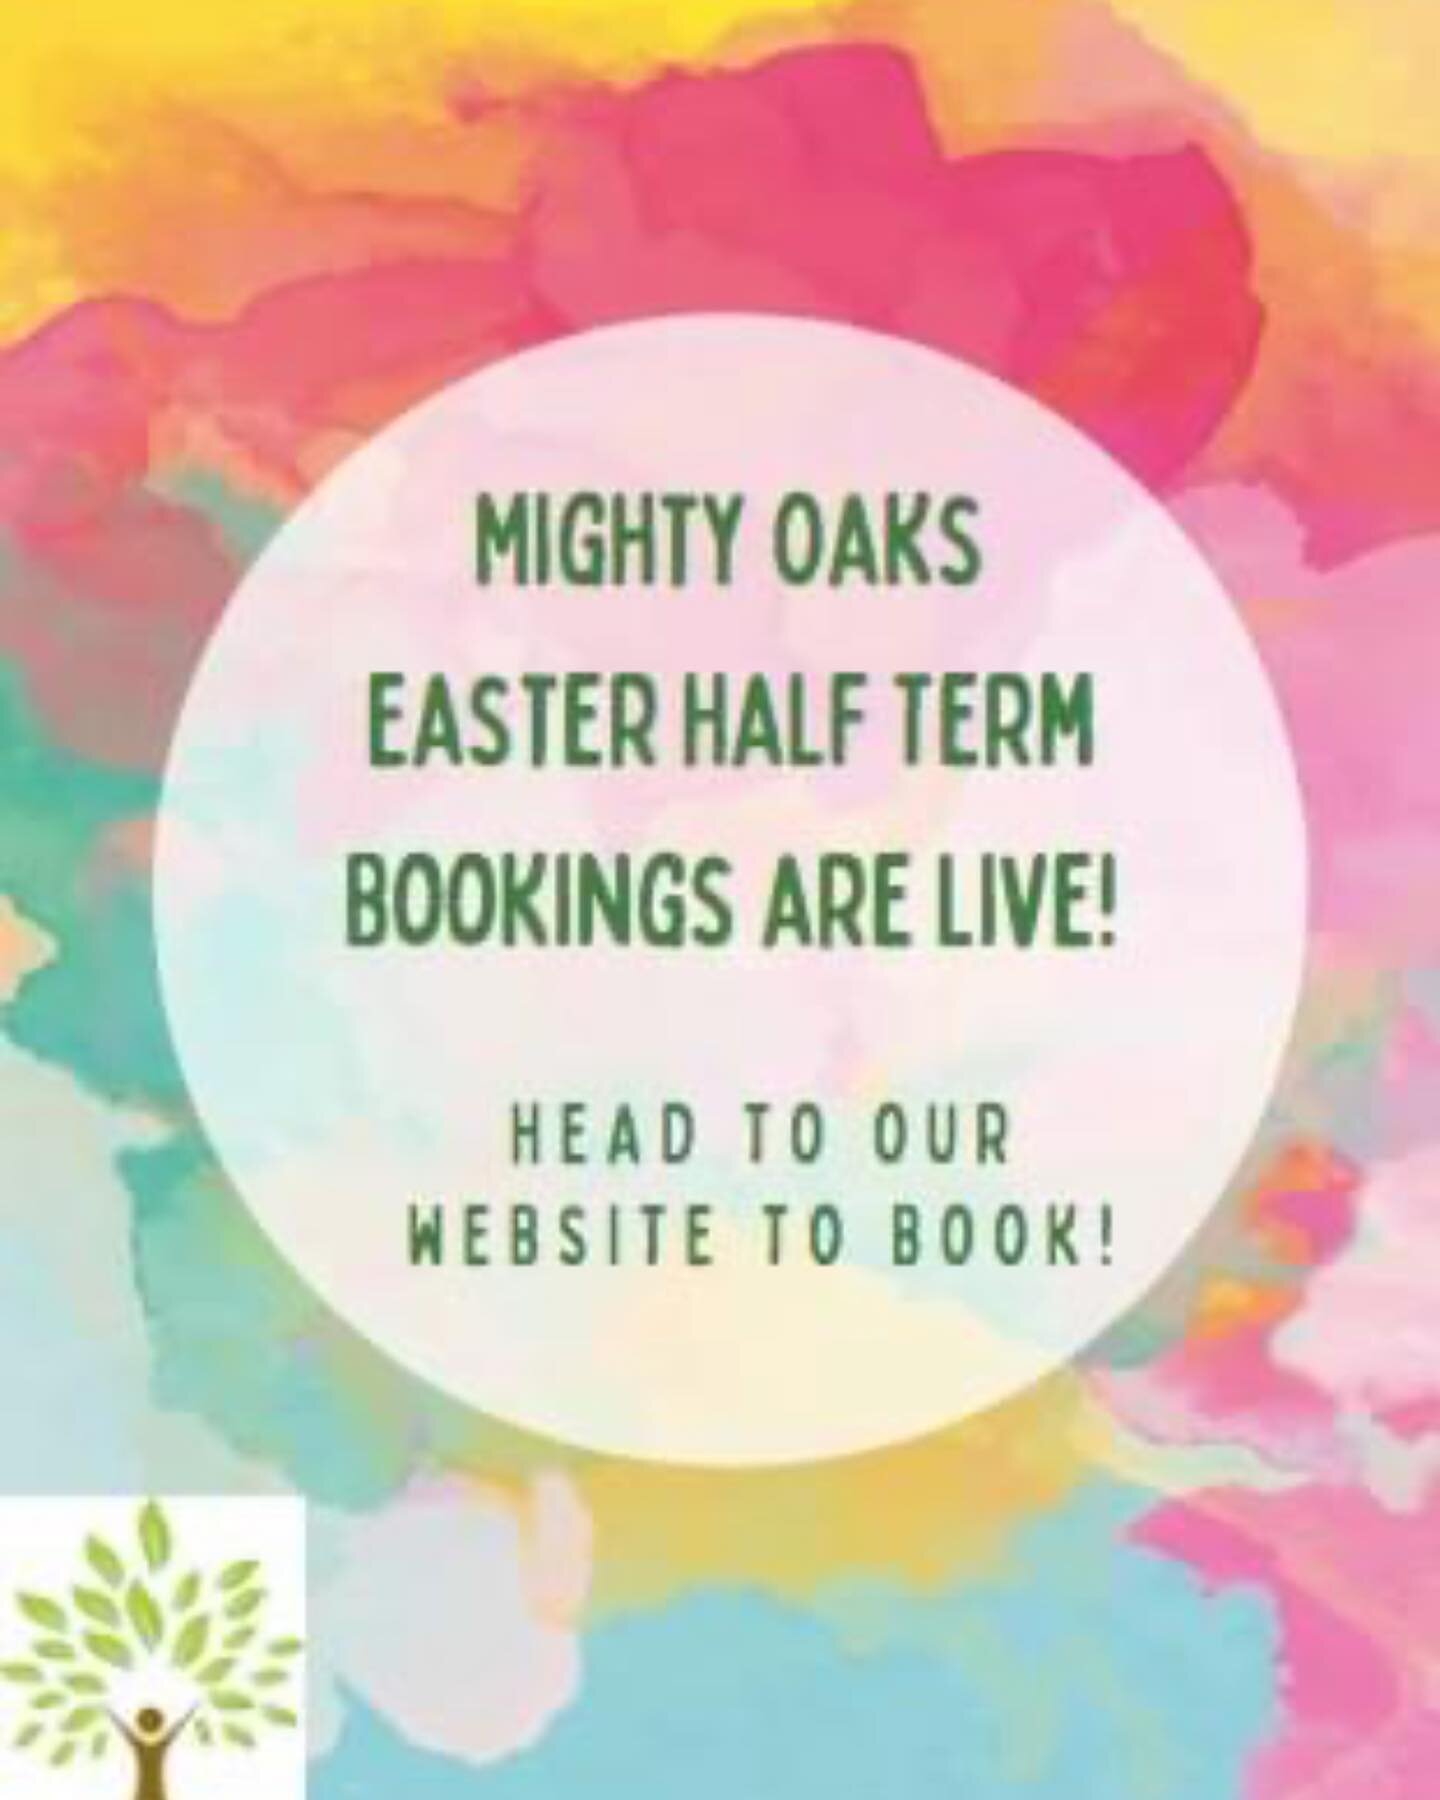 We have a few spaces left for our Mighty Oaks club over Easter at either our Coalway or English Bicknor site. Please take a look at our website for activities/days out. 

Please can we ask that you either book online or email Amber, our Mighty Oaks l